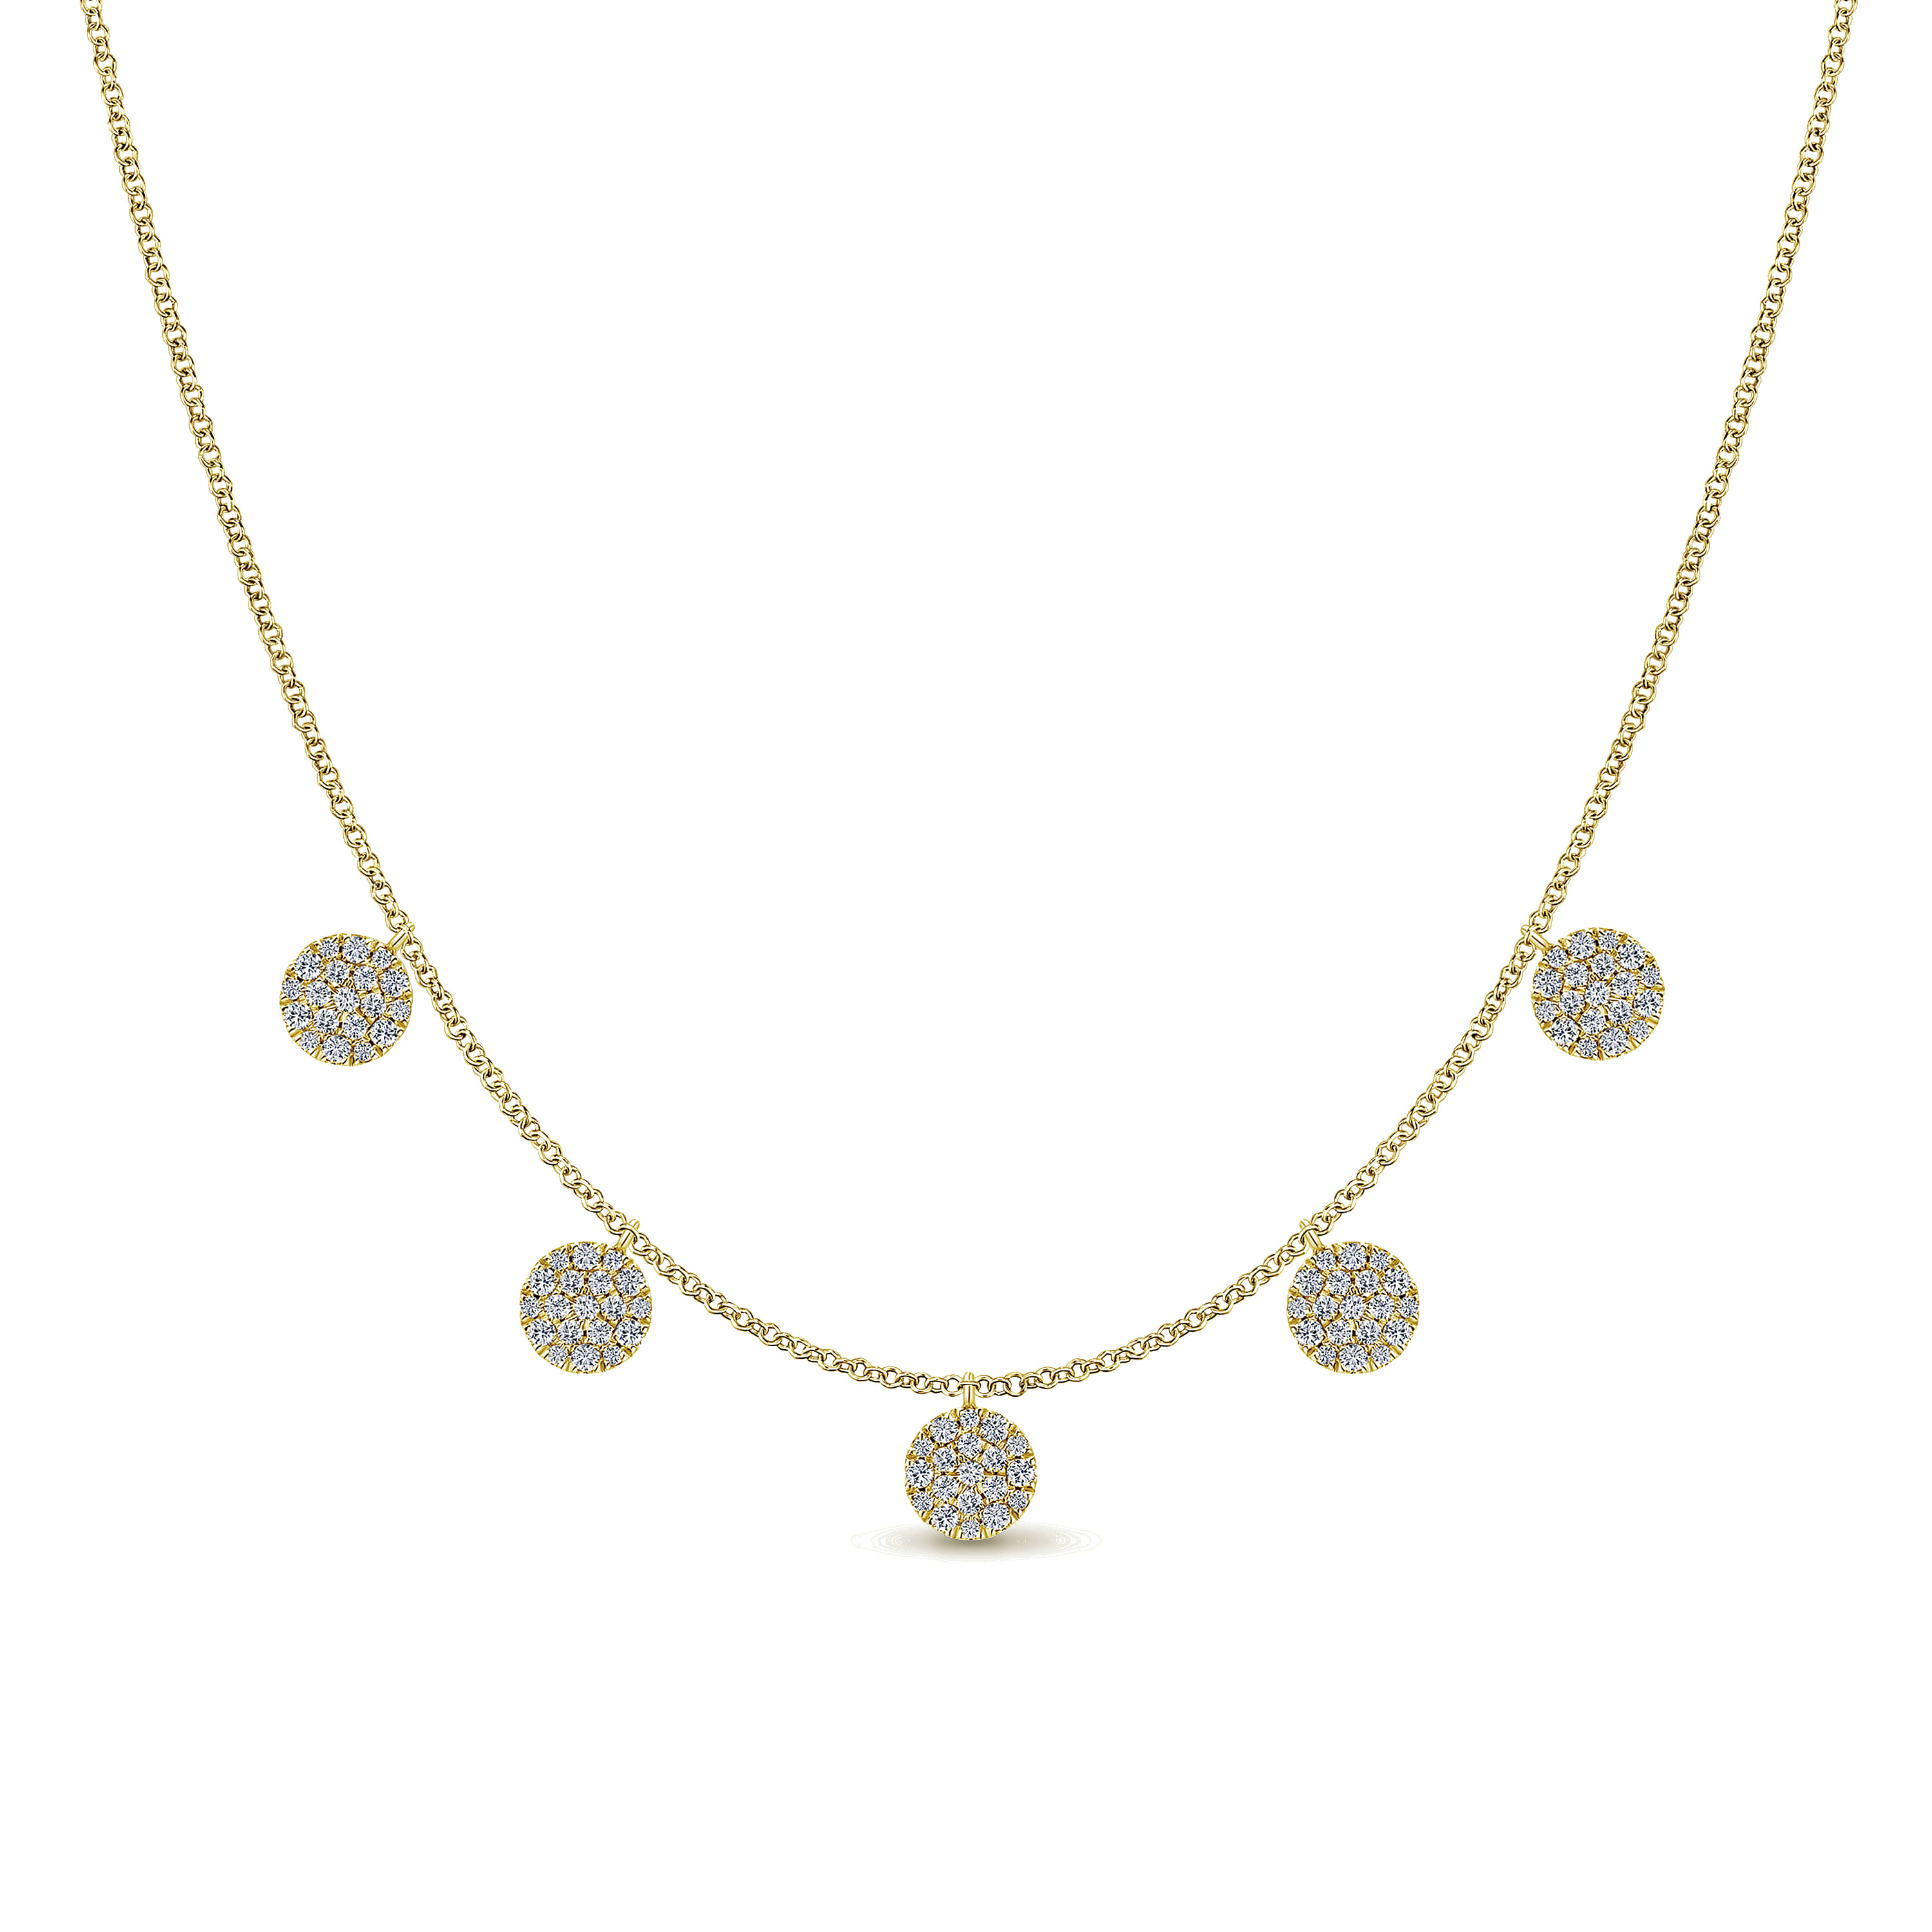 14K Yellow Gold Necklace with Round Diamond Pavé Disc Drops